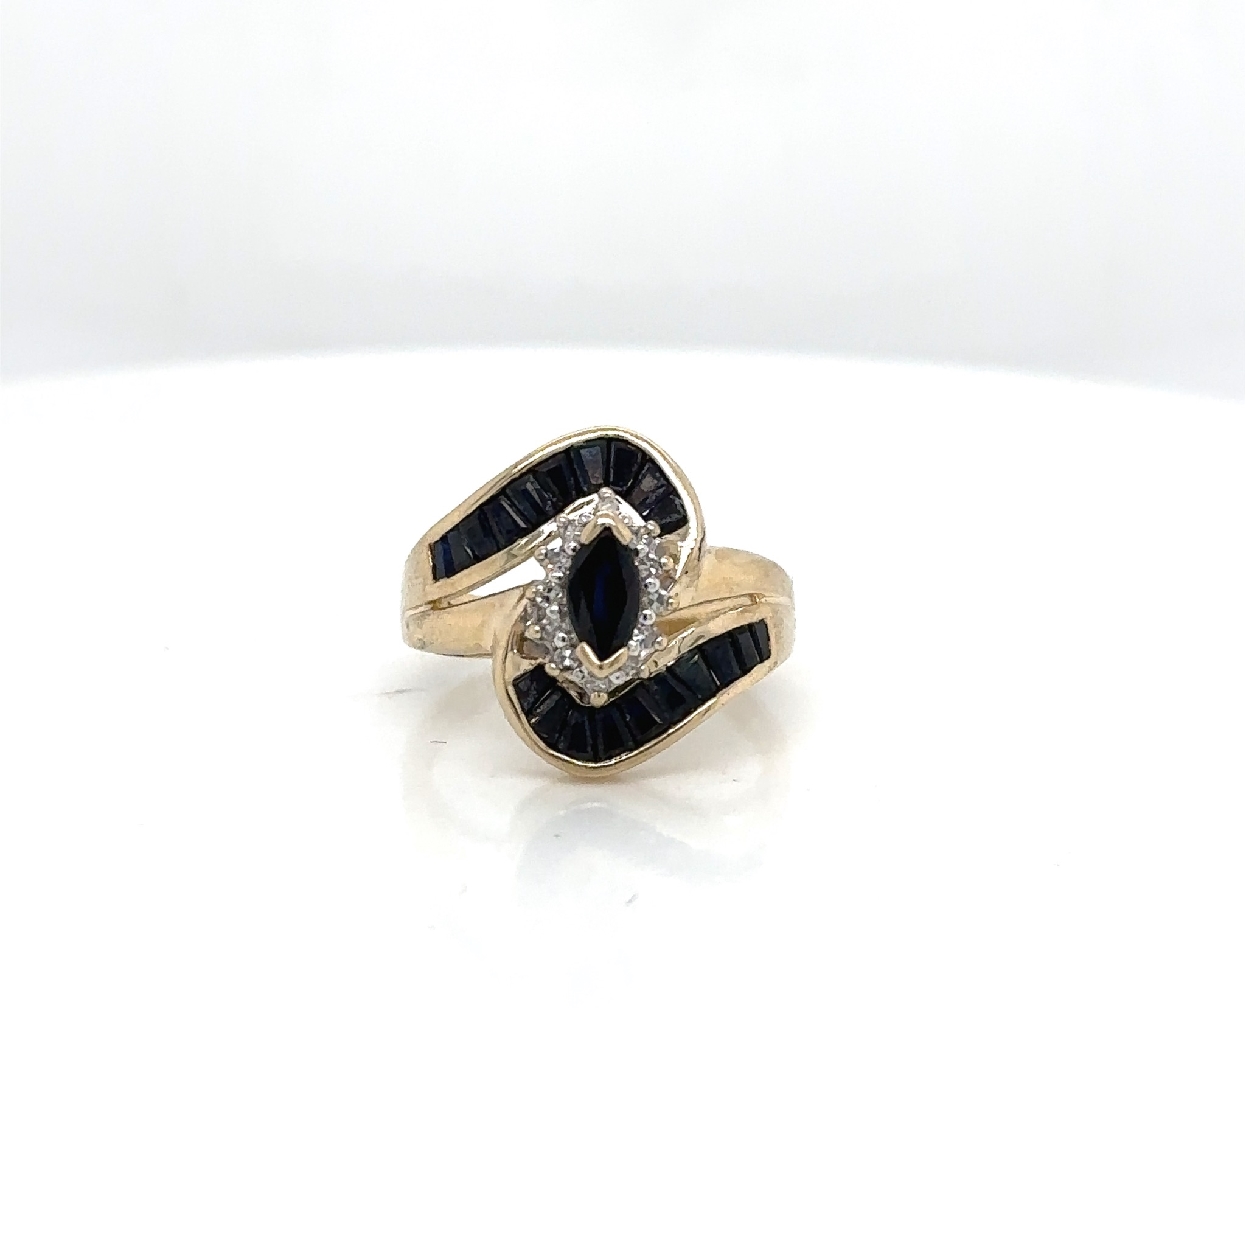 10K Yellow Gold Diamond and Sapphire Ring 

Size 5.75